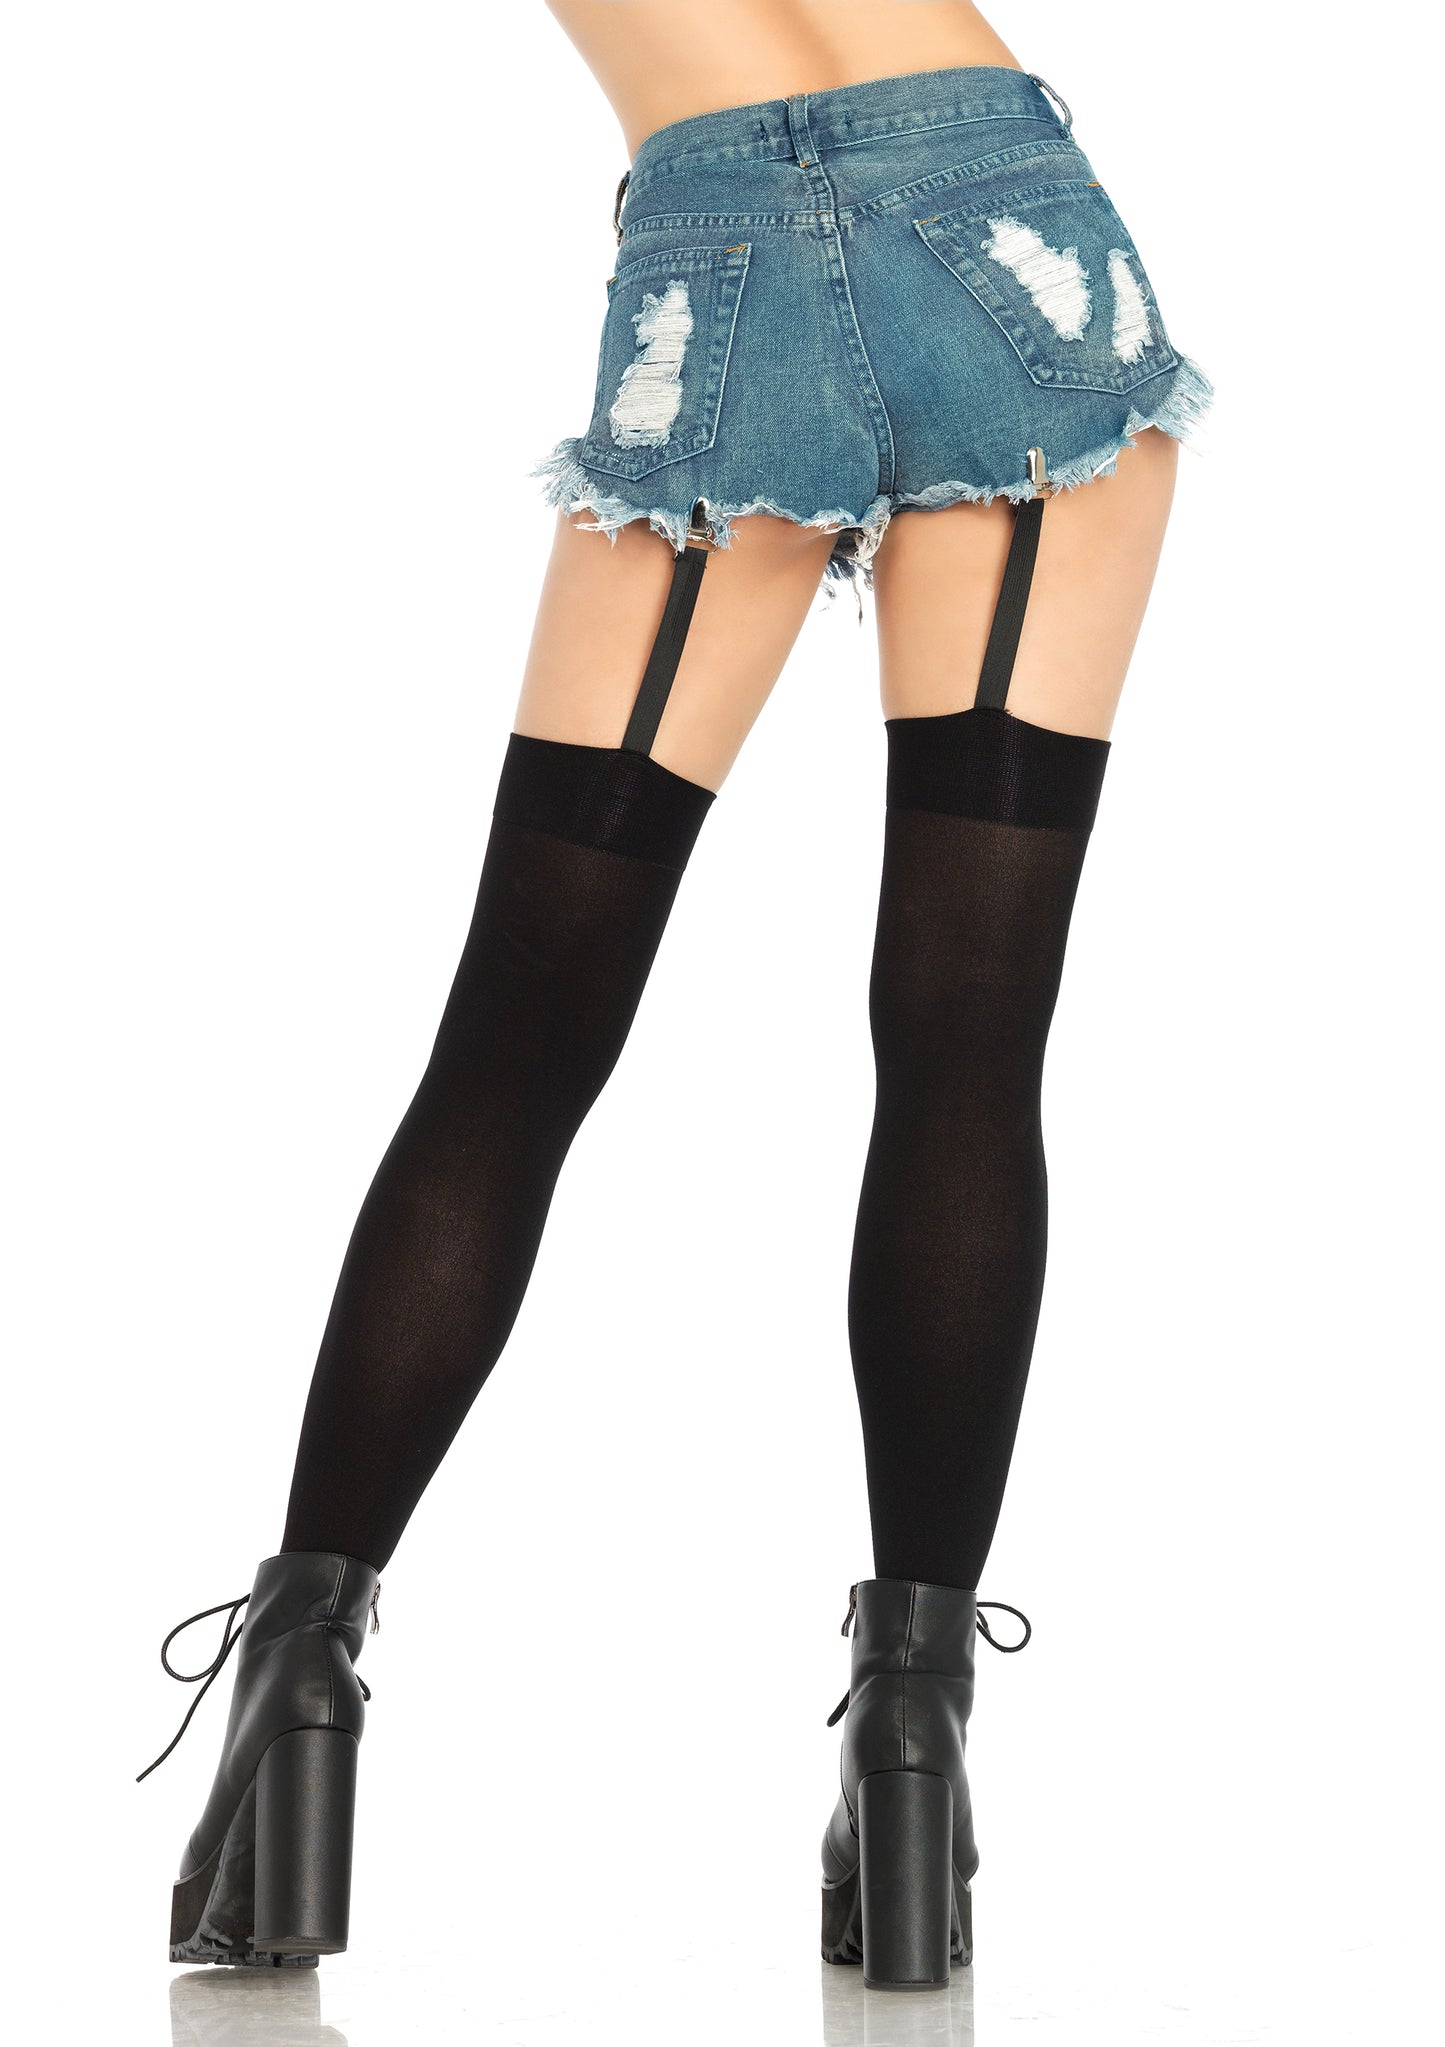 Attached Clip Garter Thigh Highs - One Size